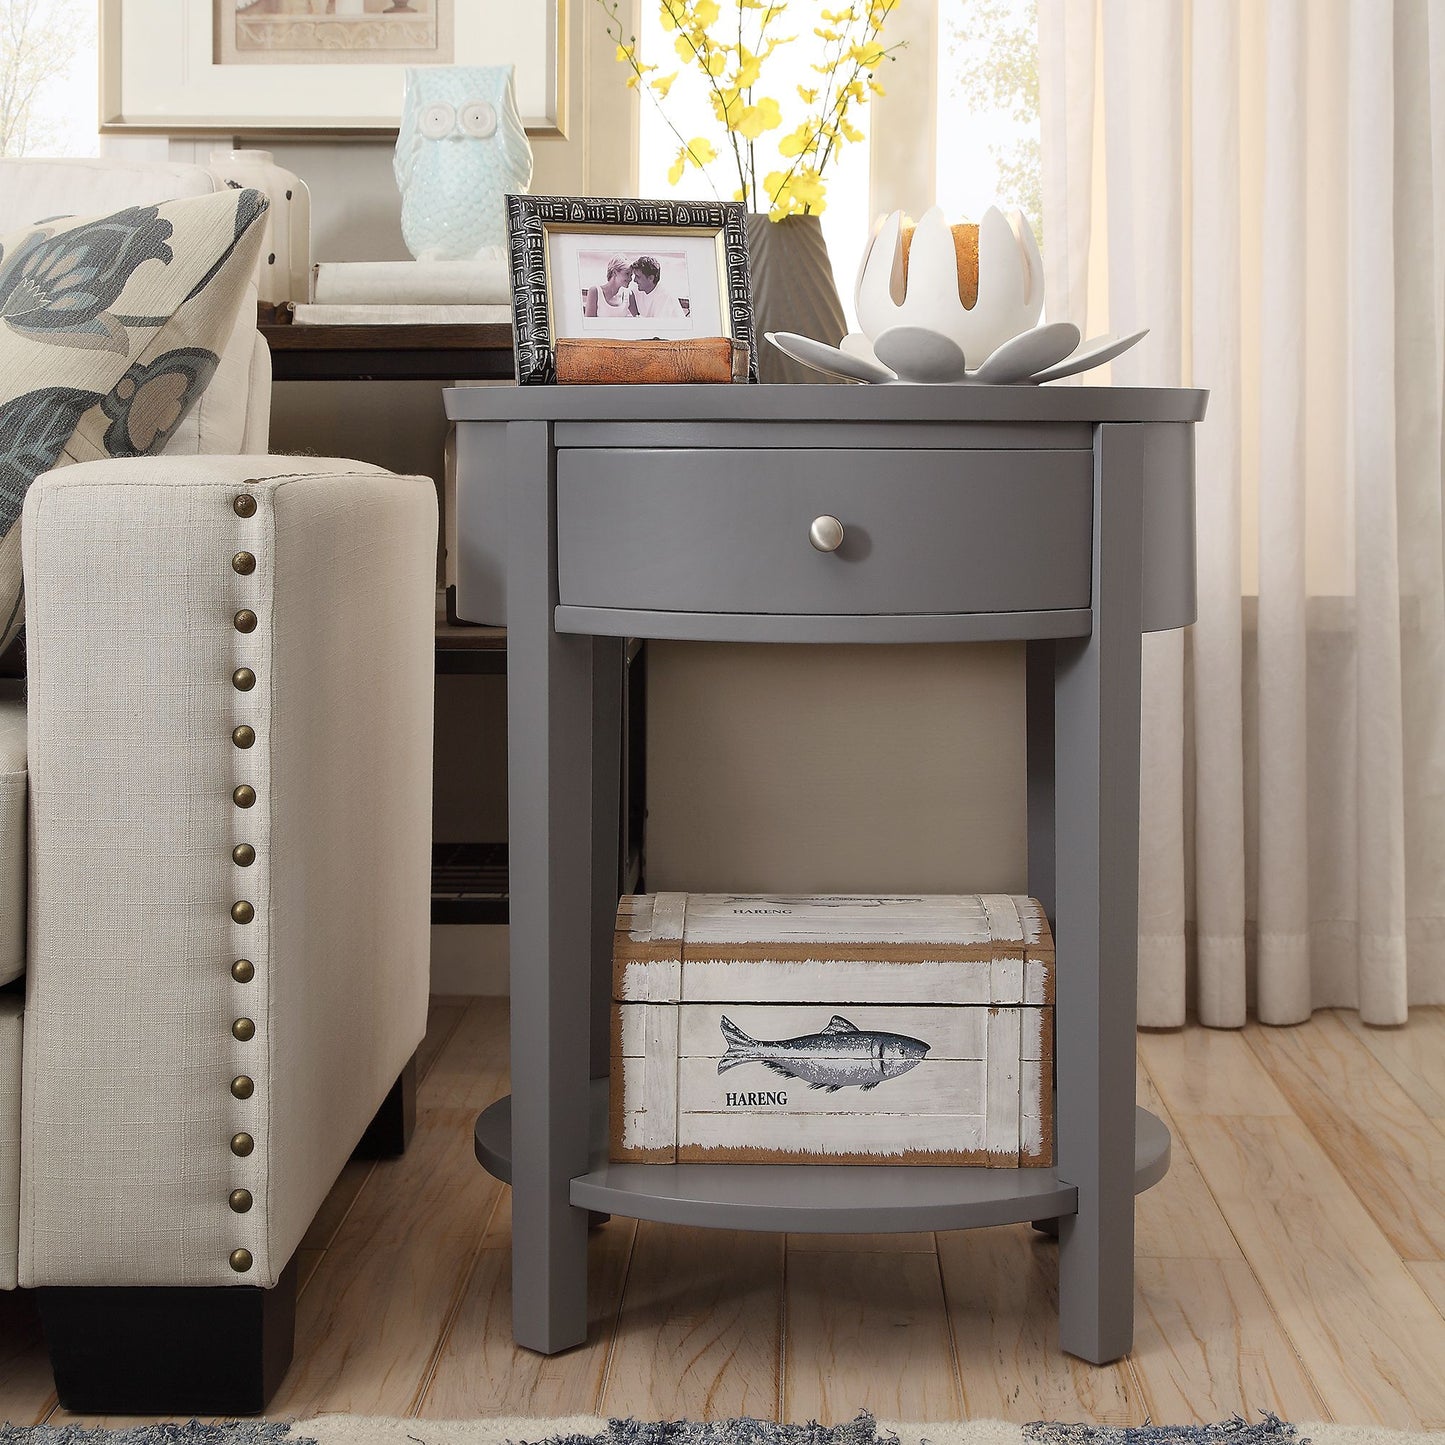 1-Drawer Oval End Table - Frost Grey